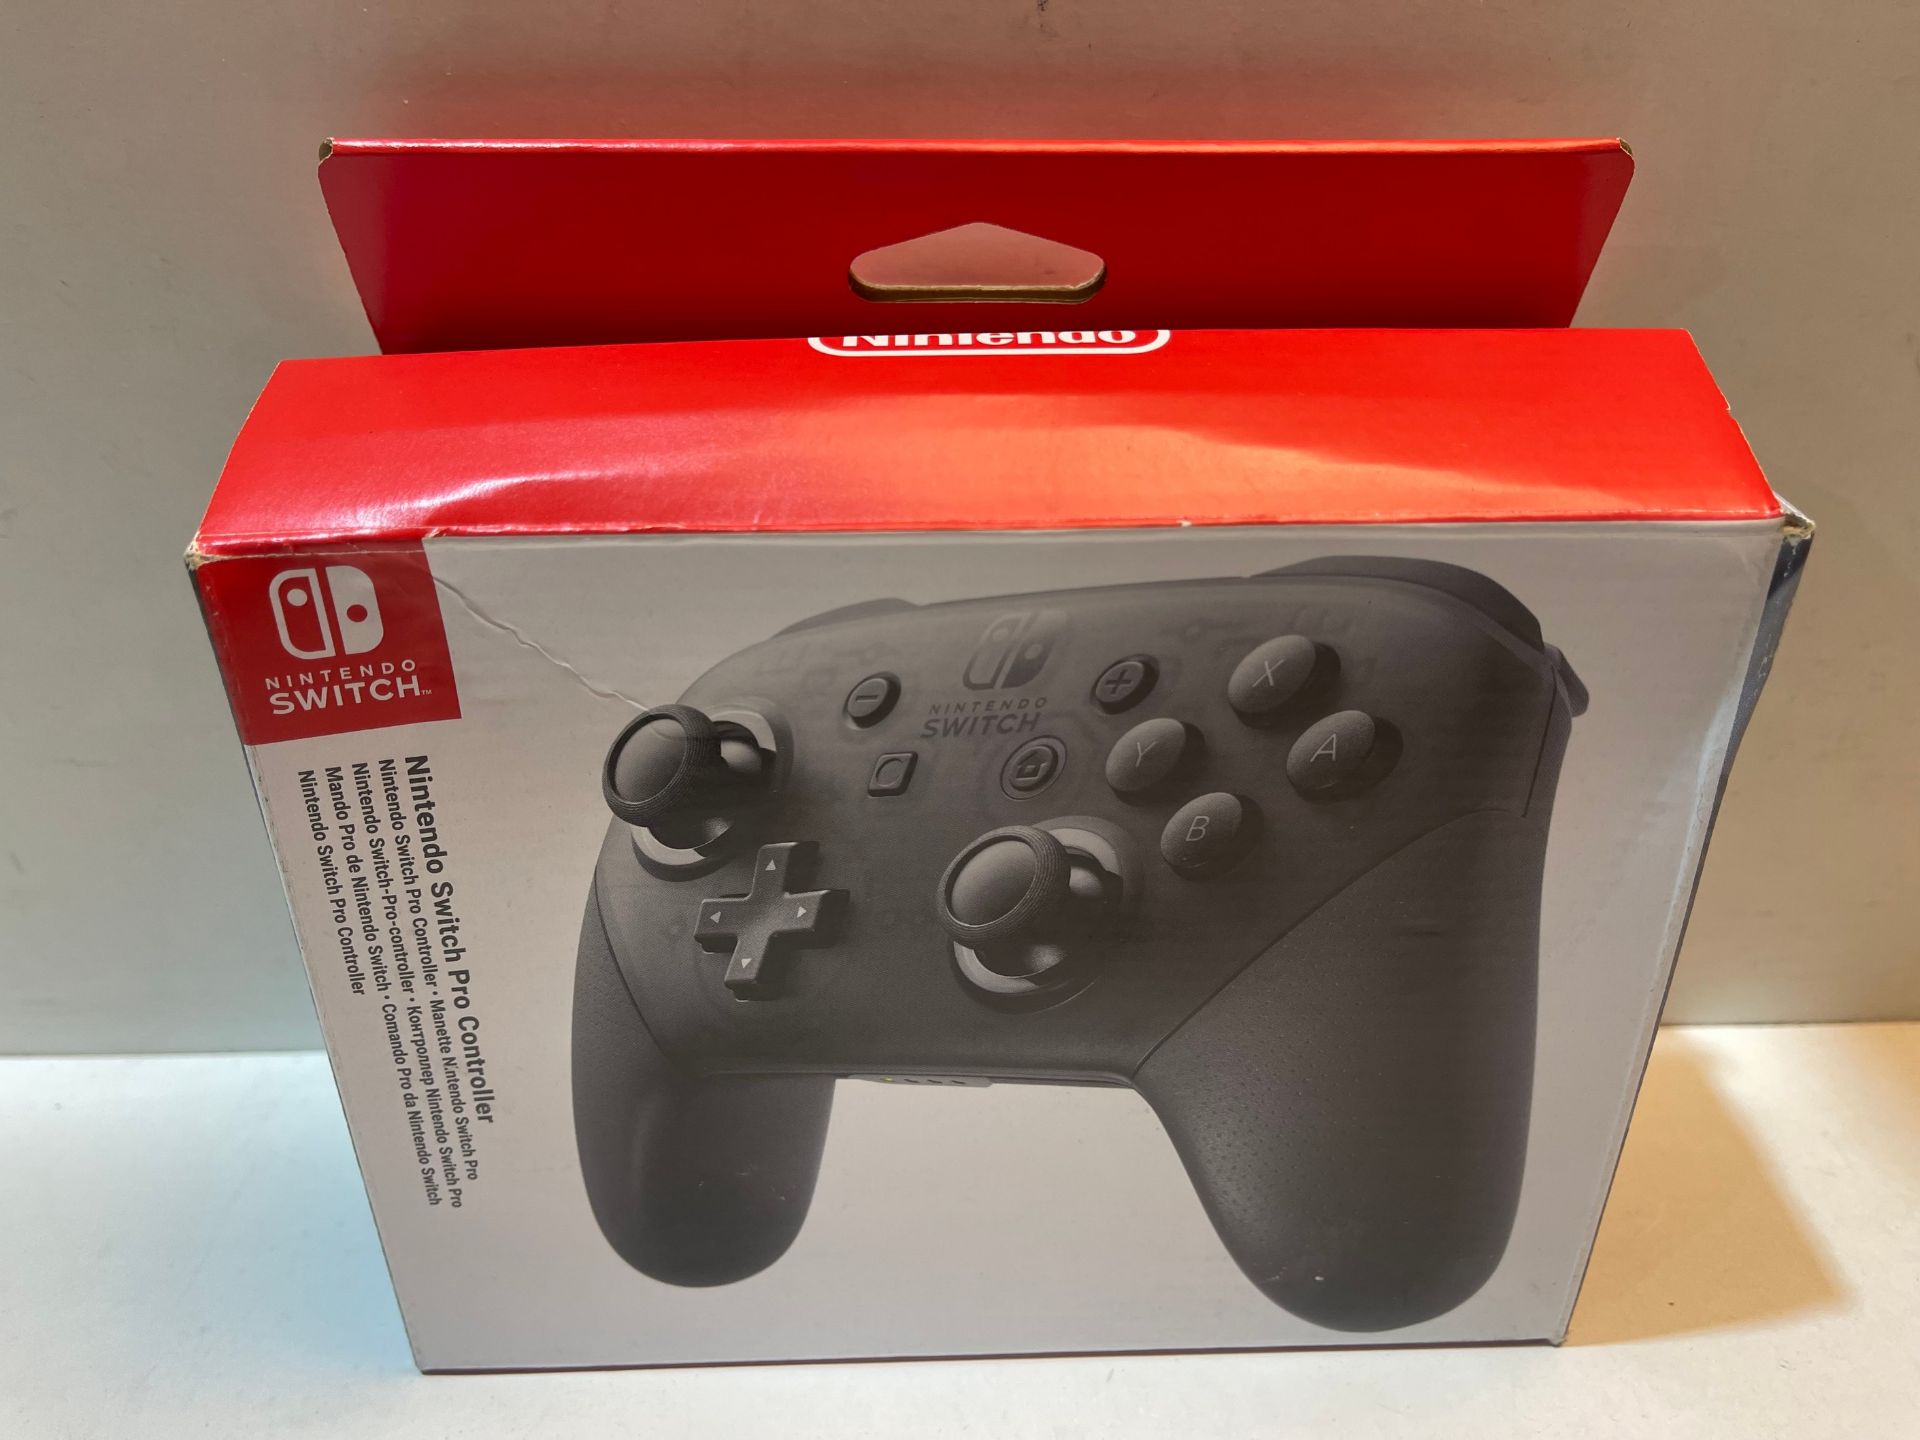 Nintendo Switch - Pro Controller £49.99Condition ReportAppraisal Available on Request- All Items are